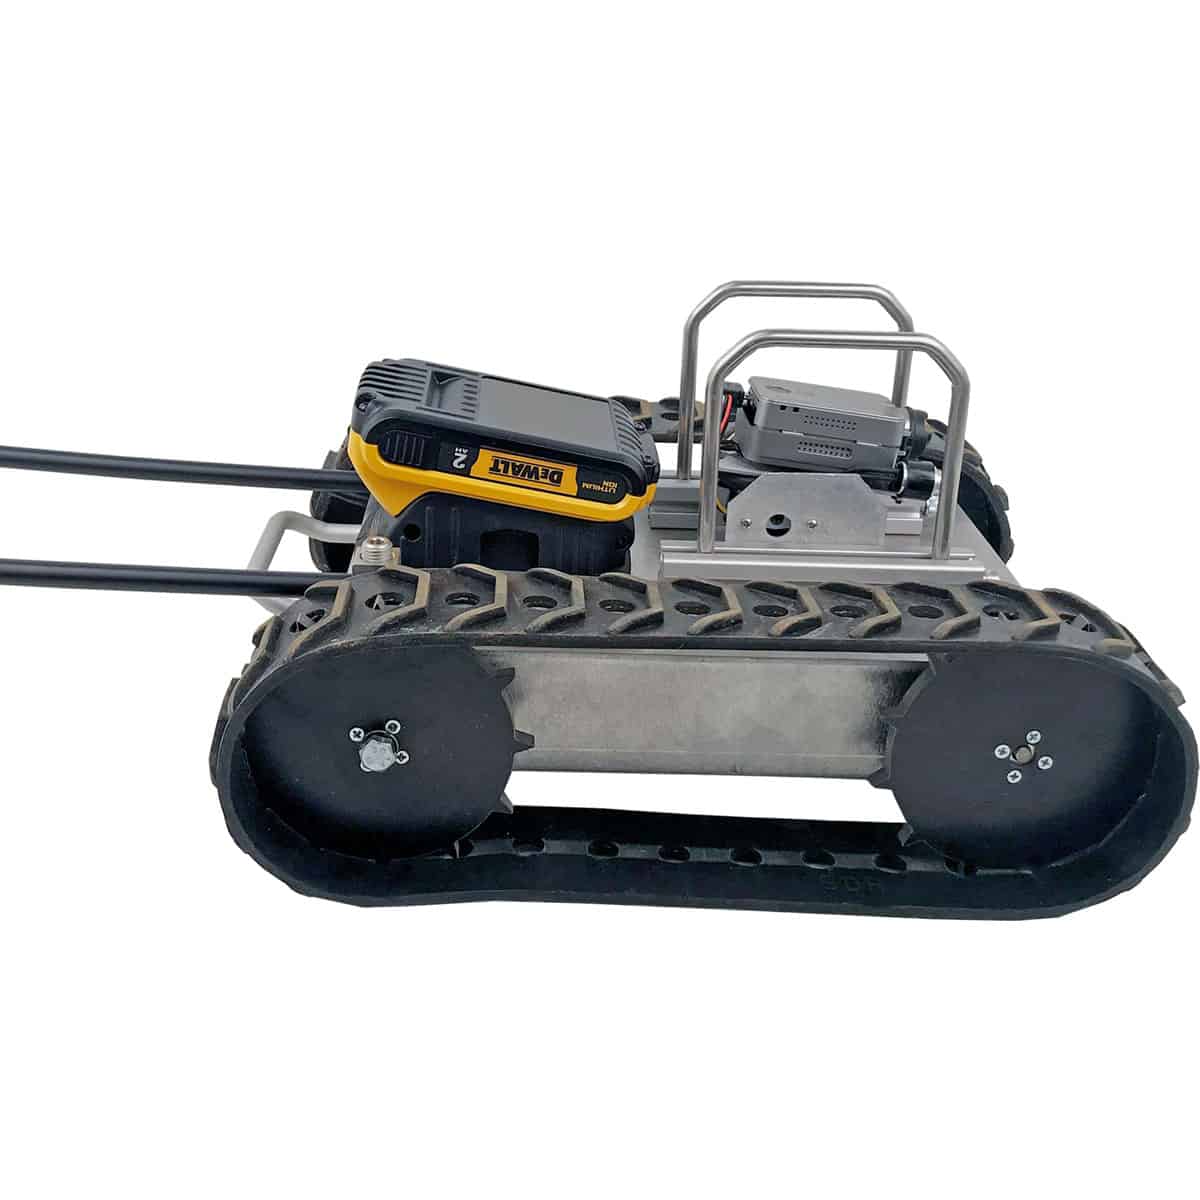 SuperDroid Robots unveils upgrades for wireless inspection robot.